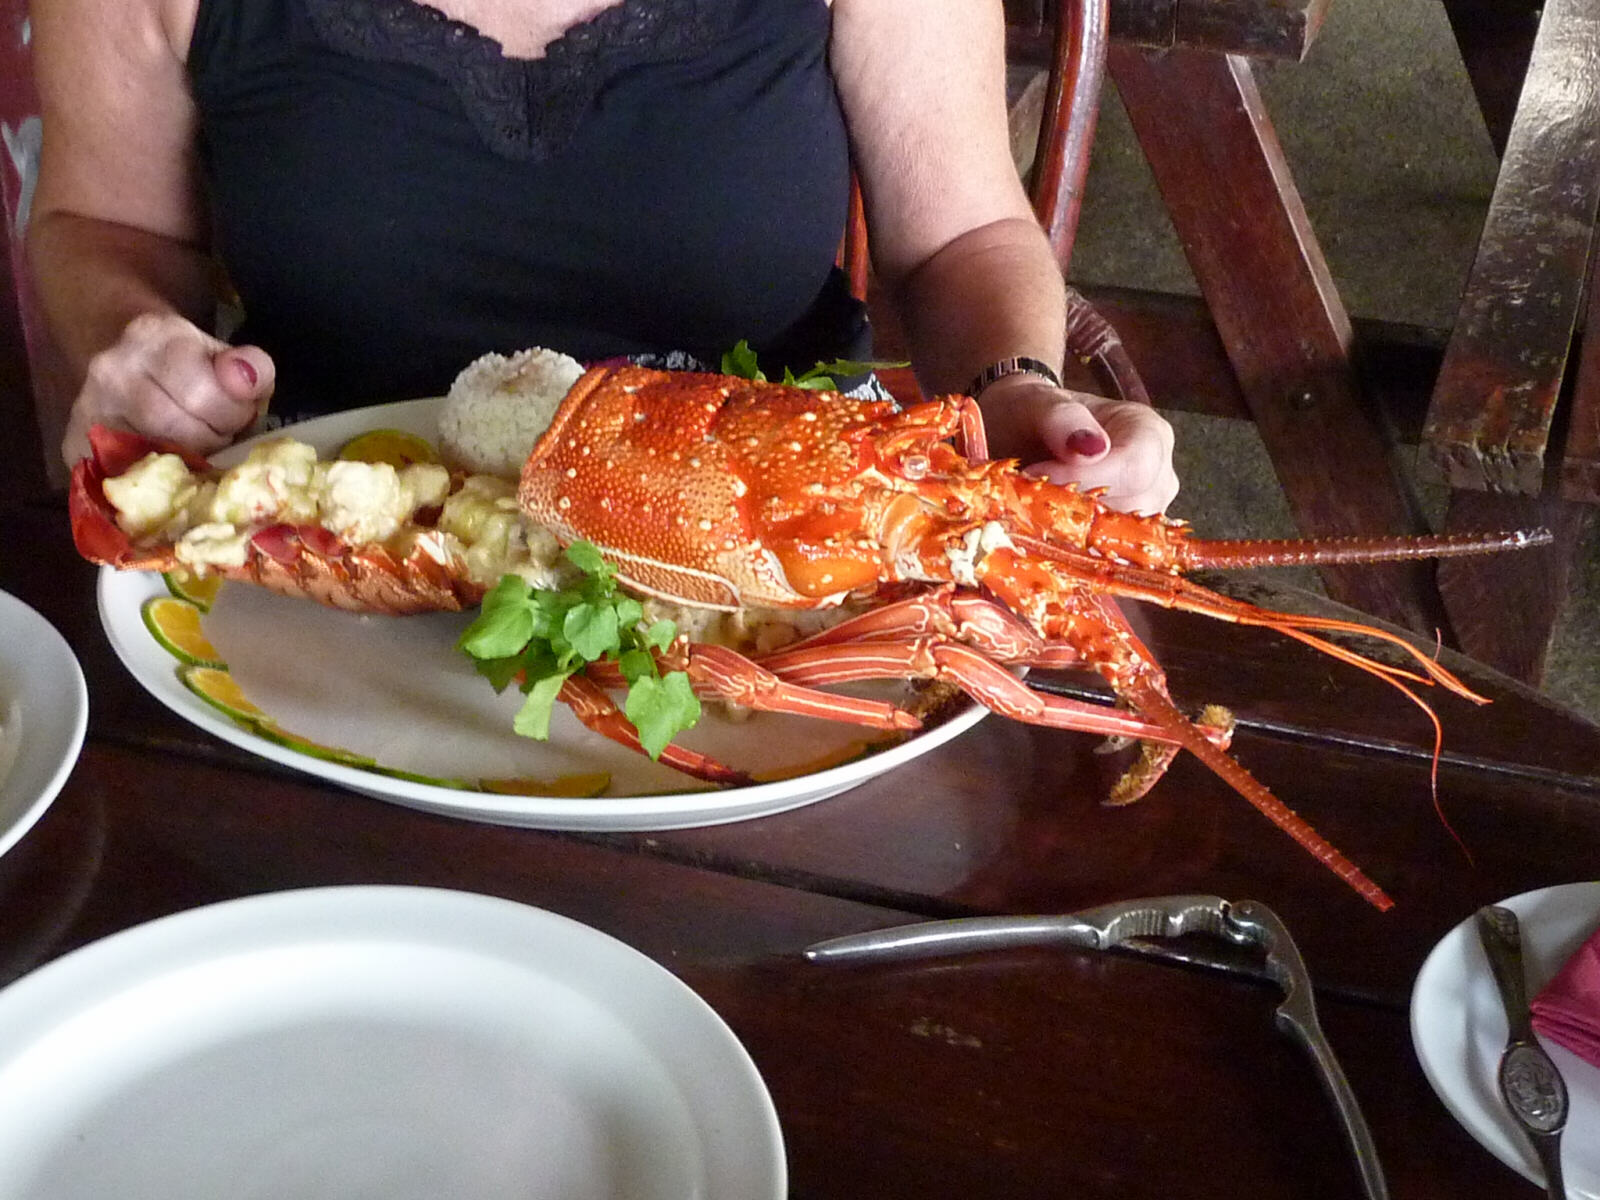 Lobster for lunch at The Office pub in Port Vila, Vanuatu